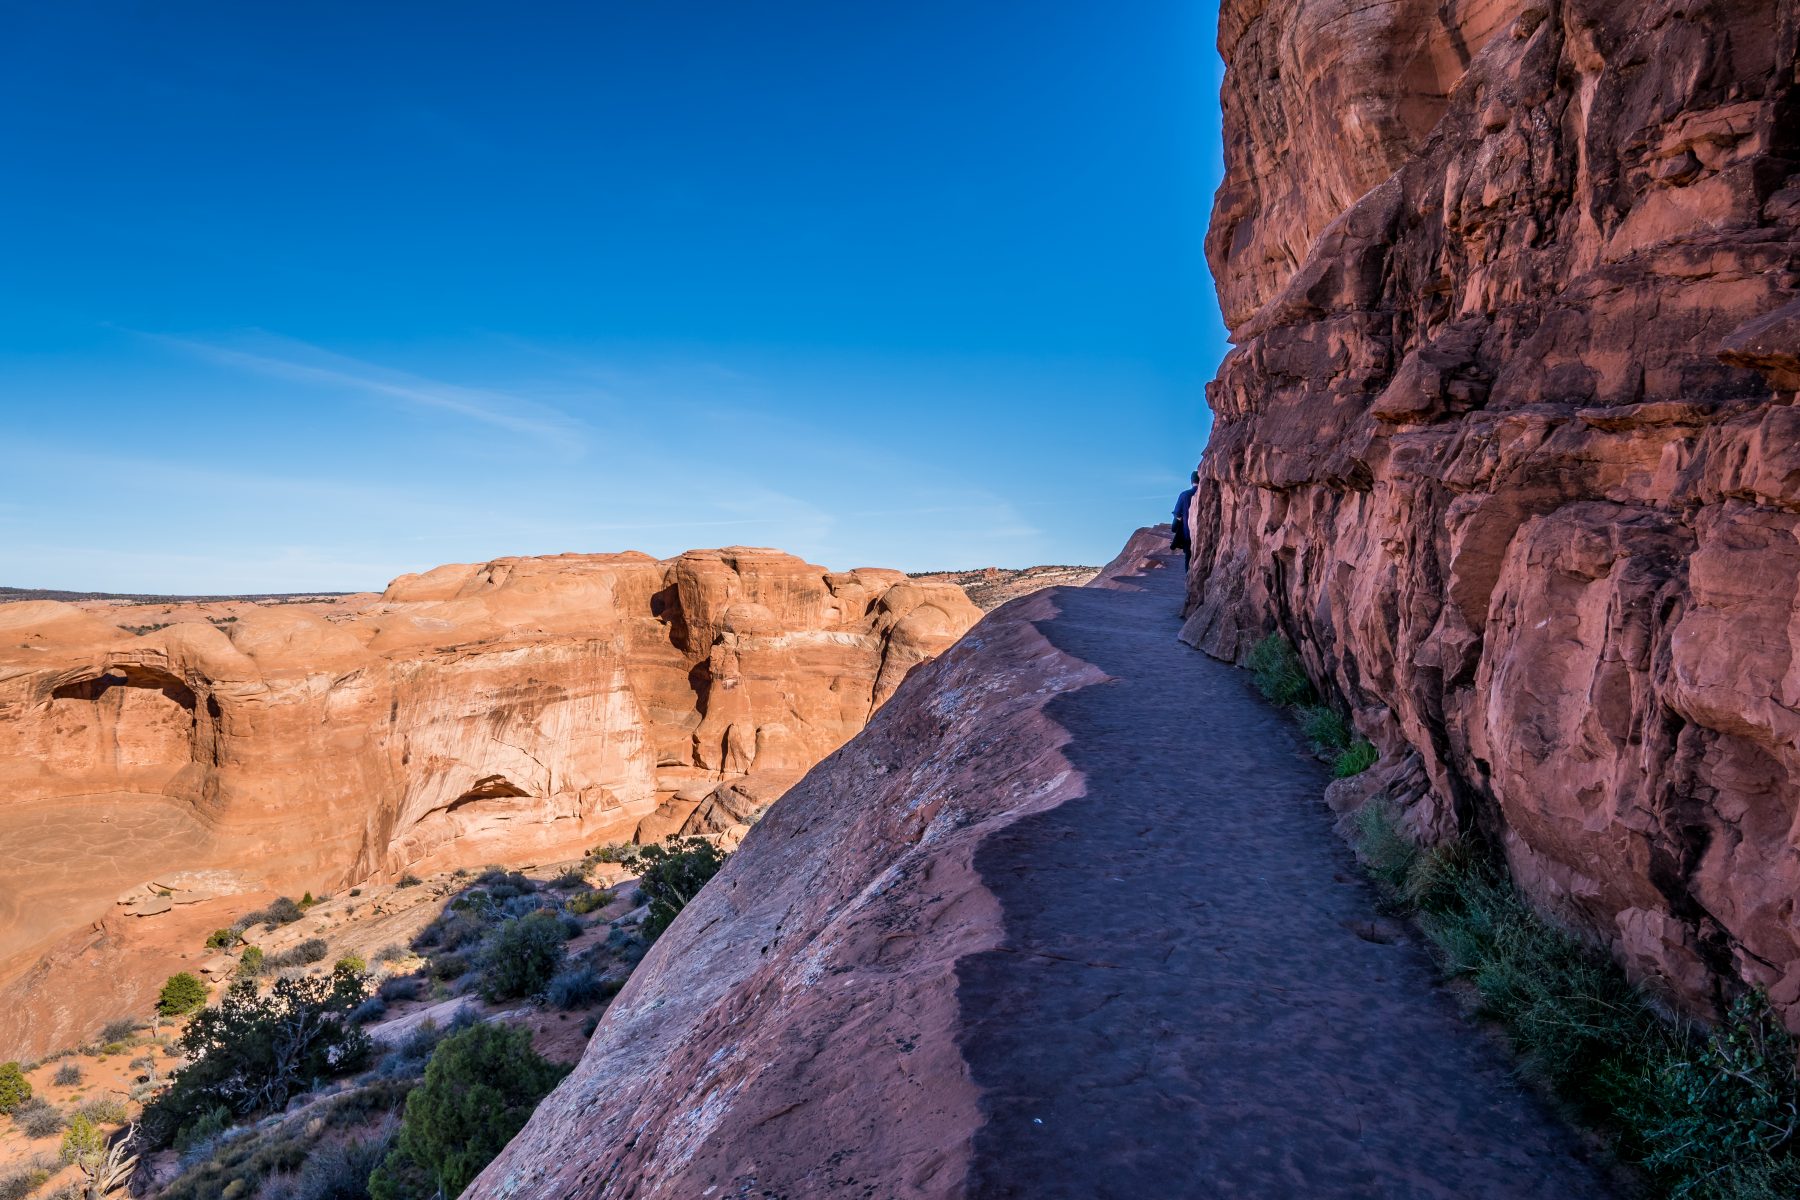 The hike to Delicate Arch follows this amazing cliffside path!